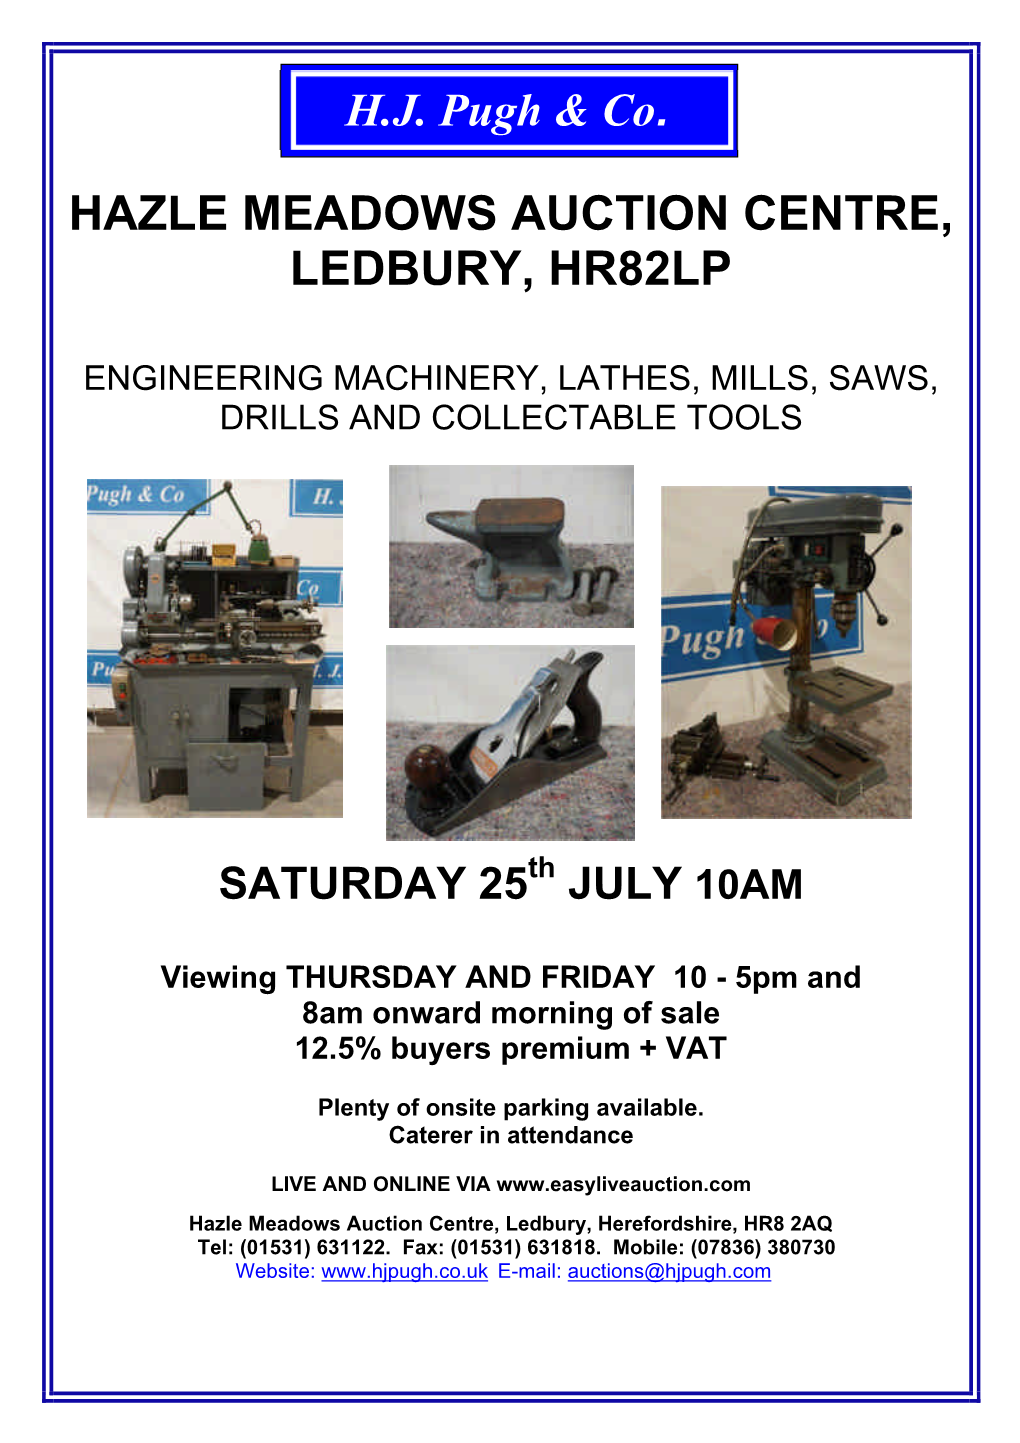 Engineering Machinery, Lathes, Mills, Saws, Drills and Collectable Tools